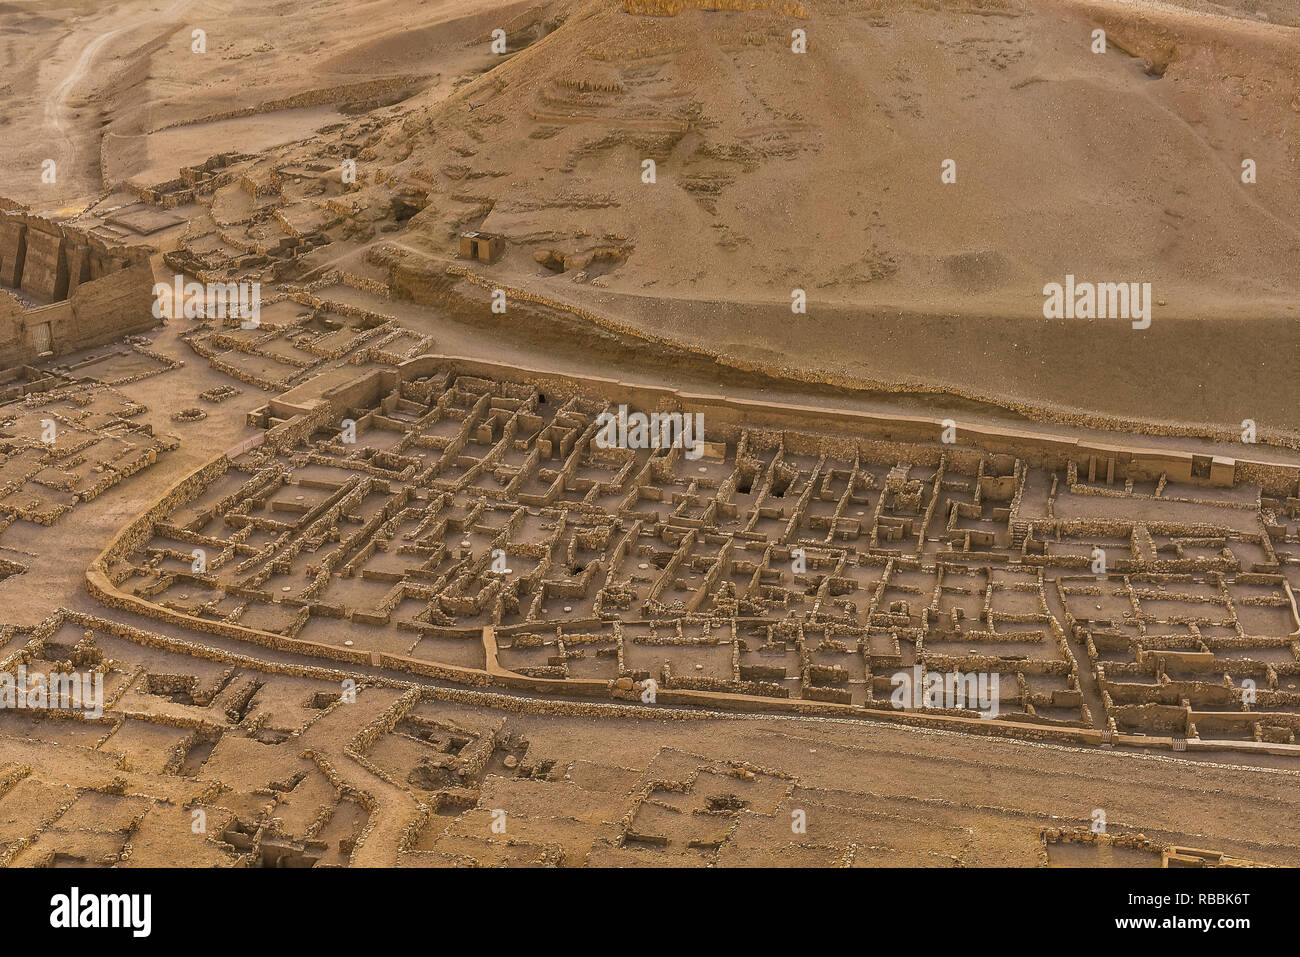 Ancient ruins at the village of The Workers at Deir El-Medina, a view from a hot air balloon, Luxor, Egypt, october 22, 2018 Stock Photo